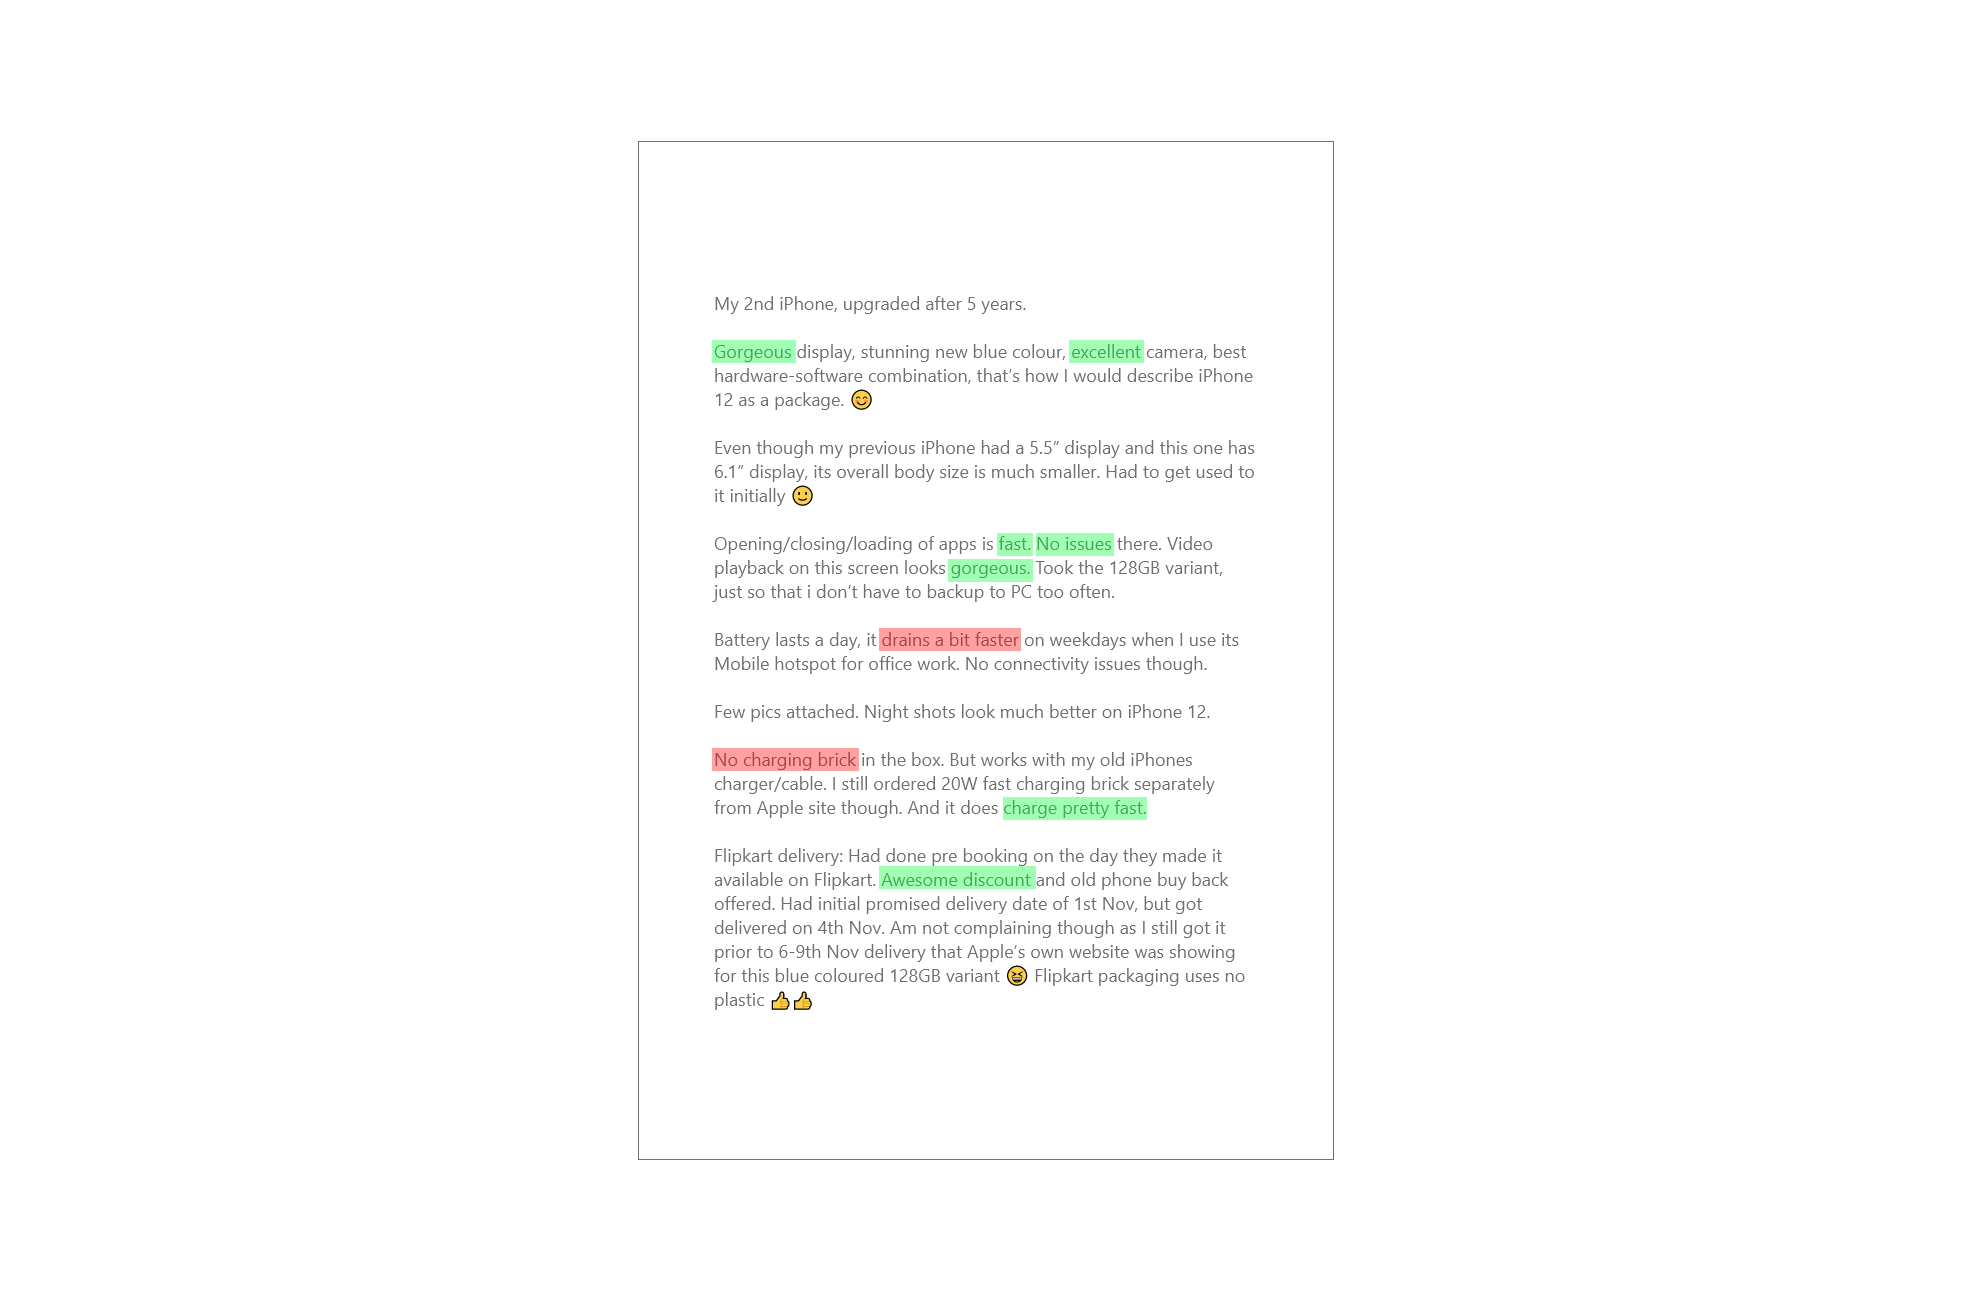 annotated text for review moderation